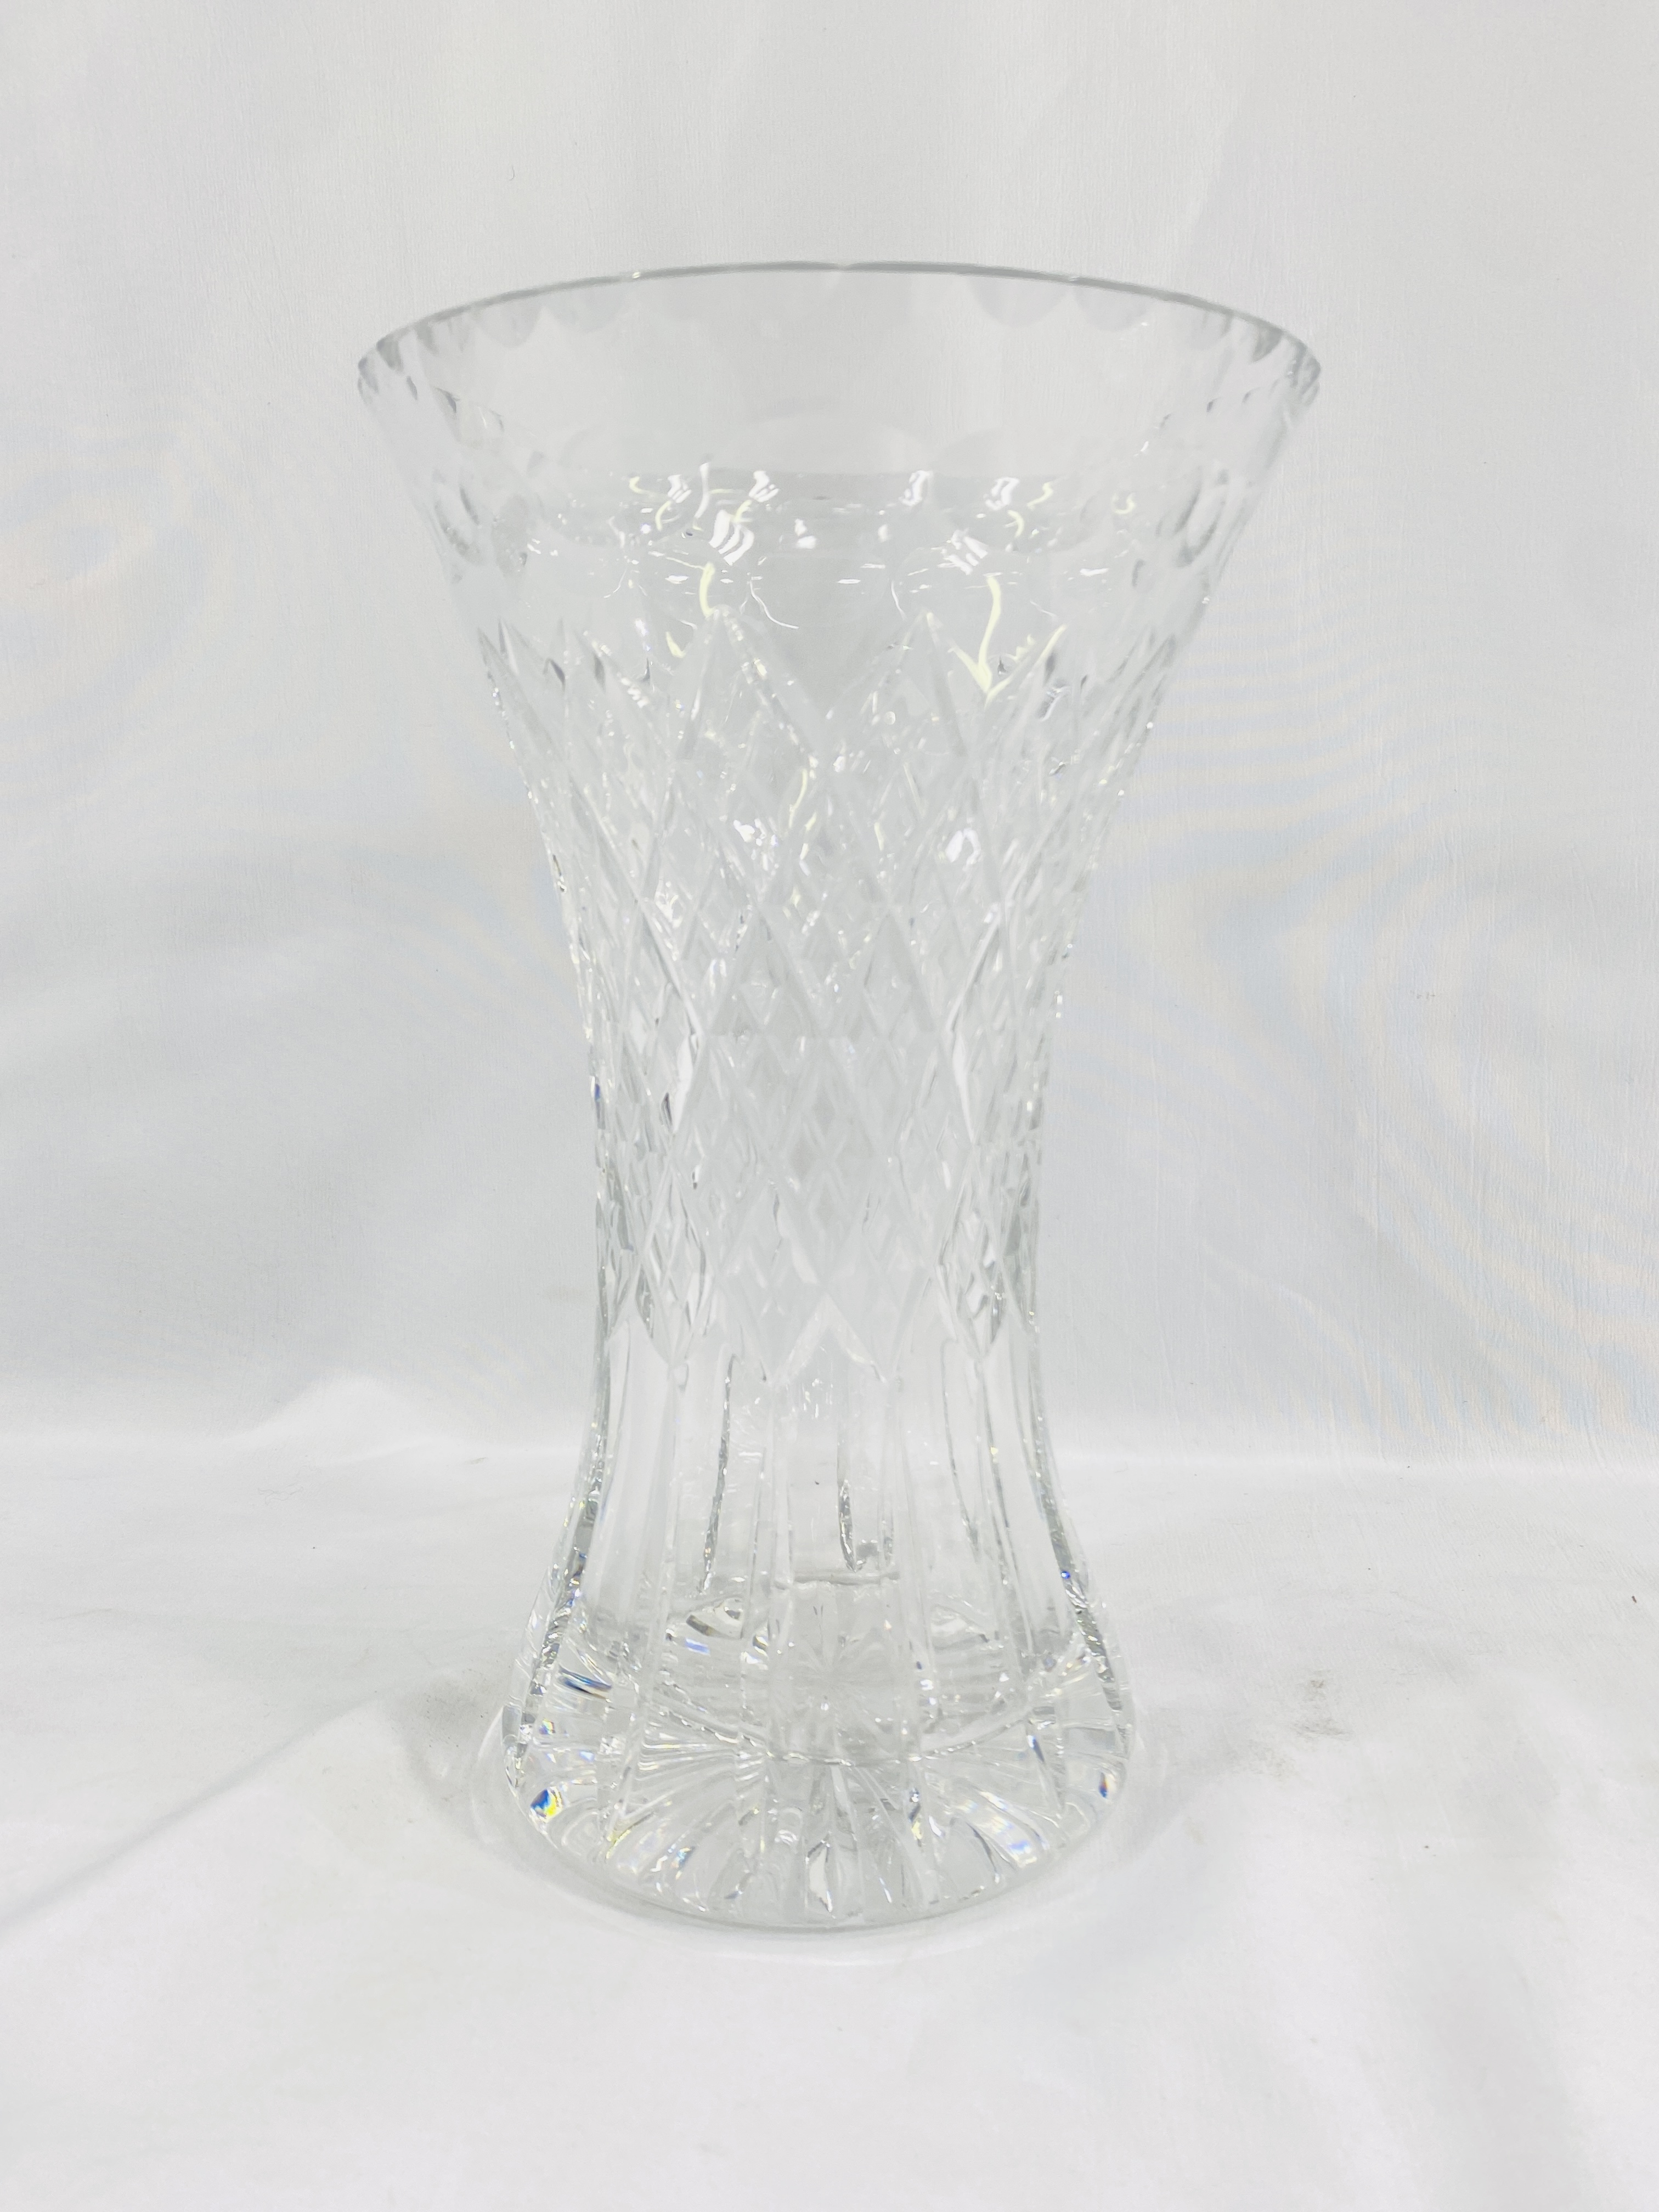 A Royal Doulton cut glass vase and other glassware - Image 7 of 9